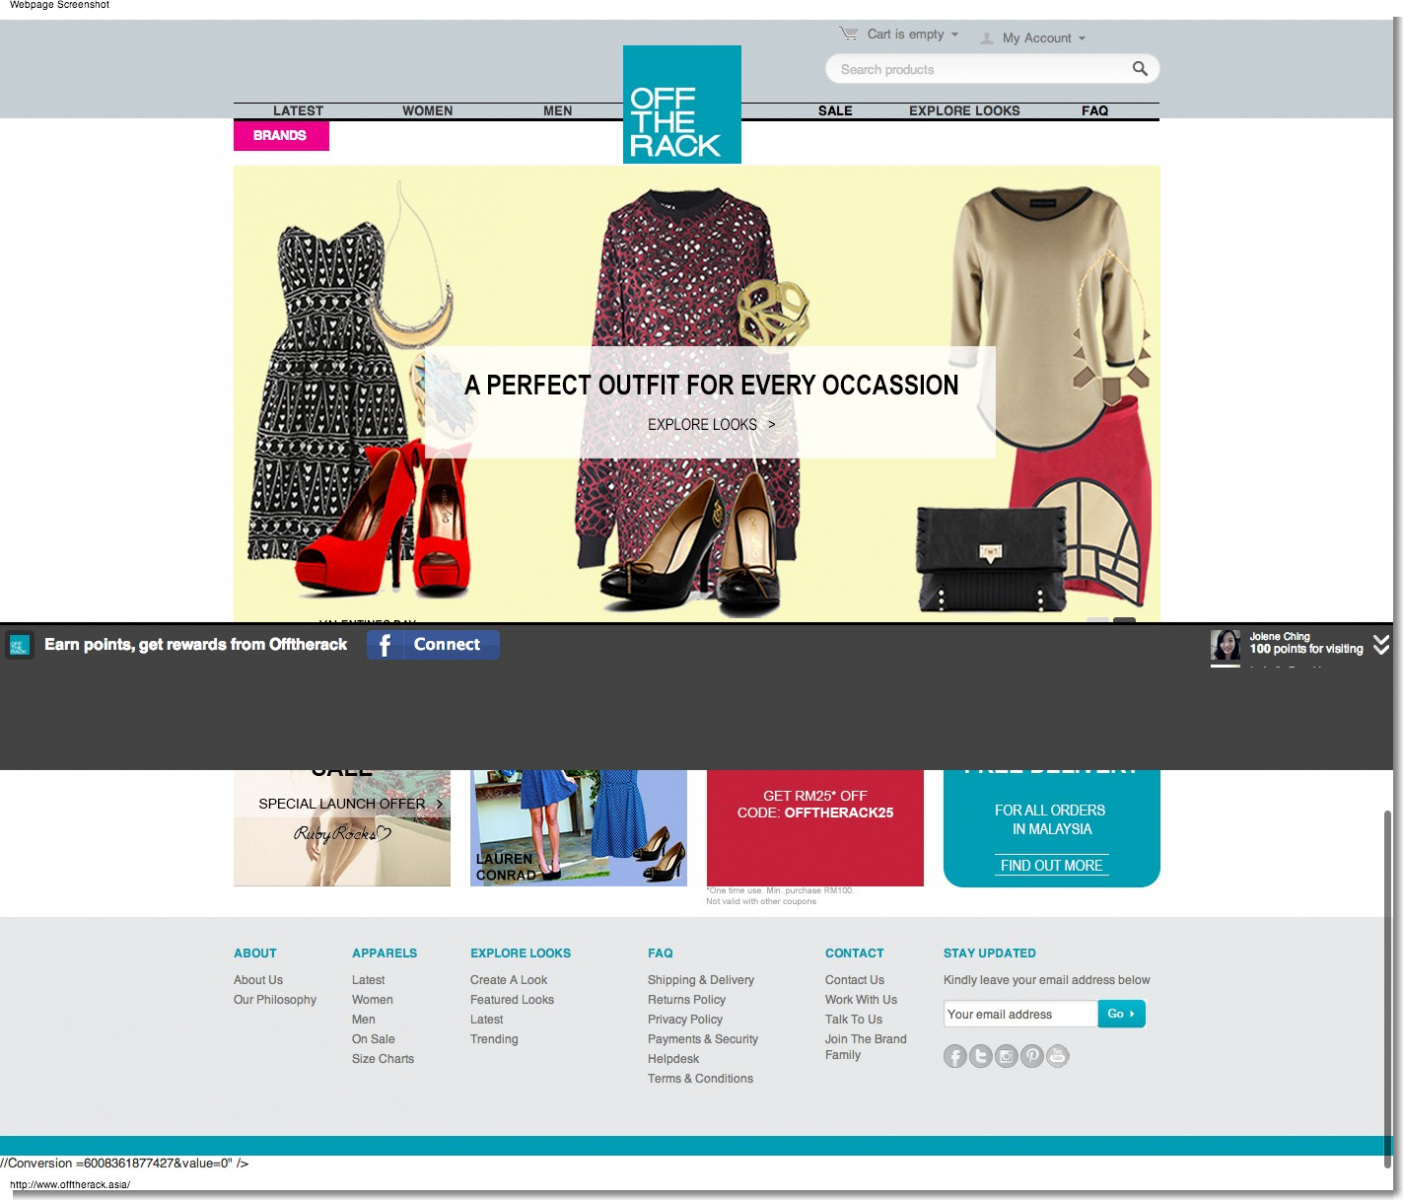 Startup hopes social fashionistas will buy Off The Rack Asia